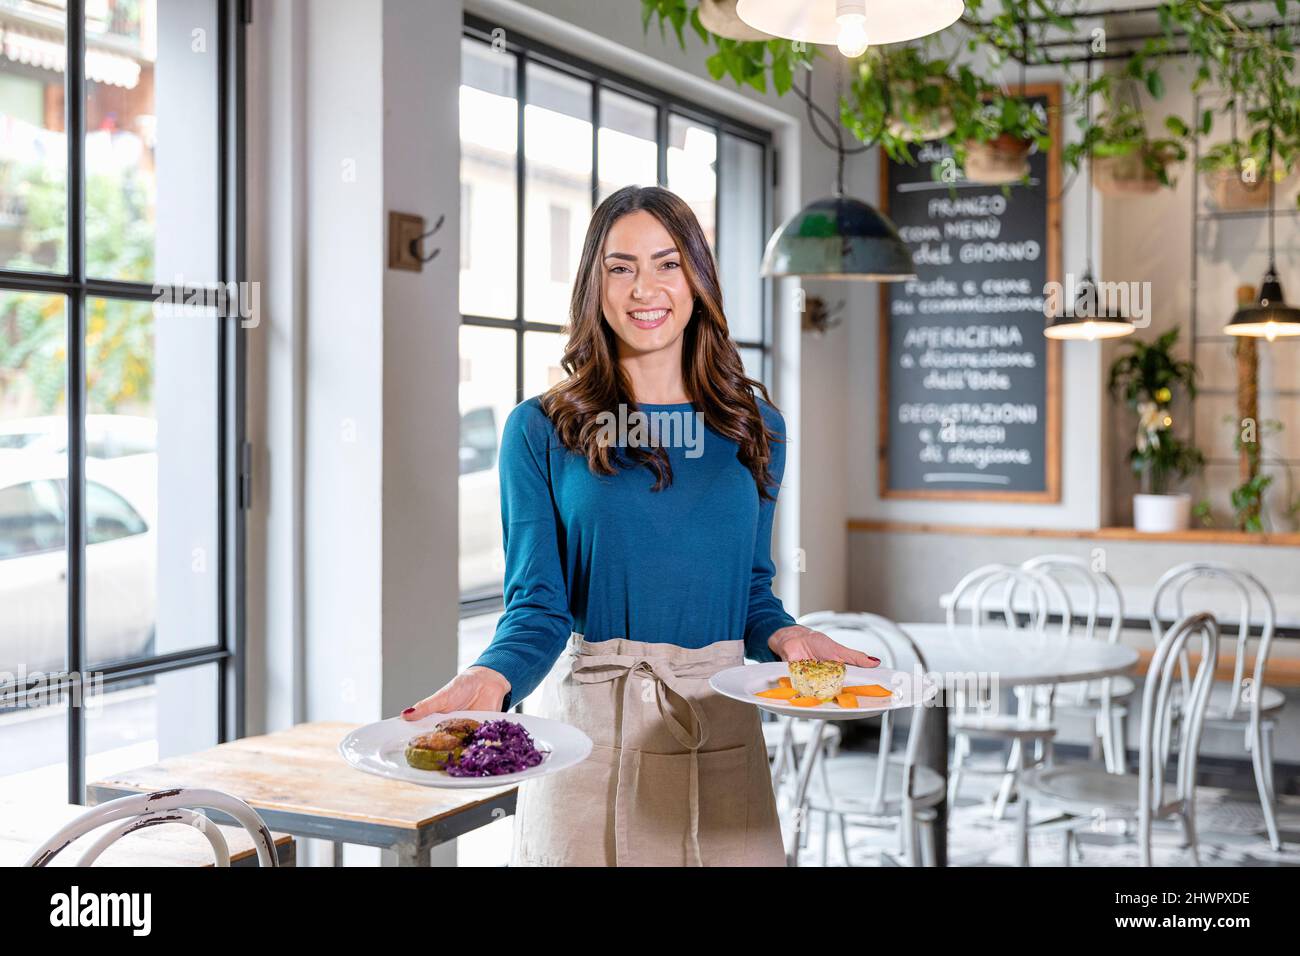 Smiling waitress carrying food plates in cafe Stock Photo